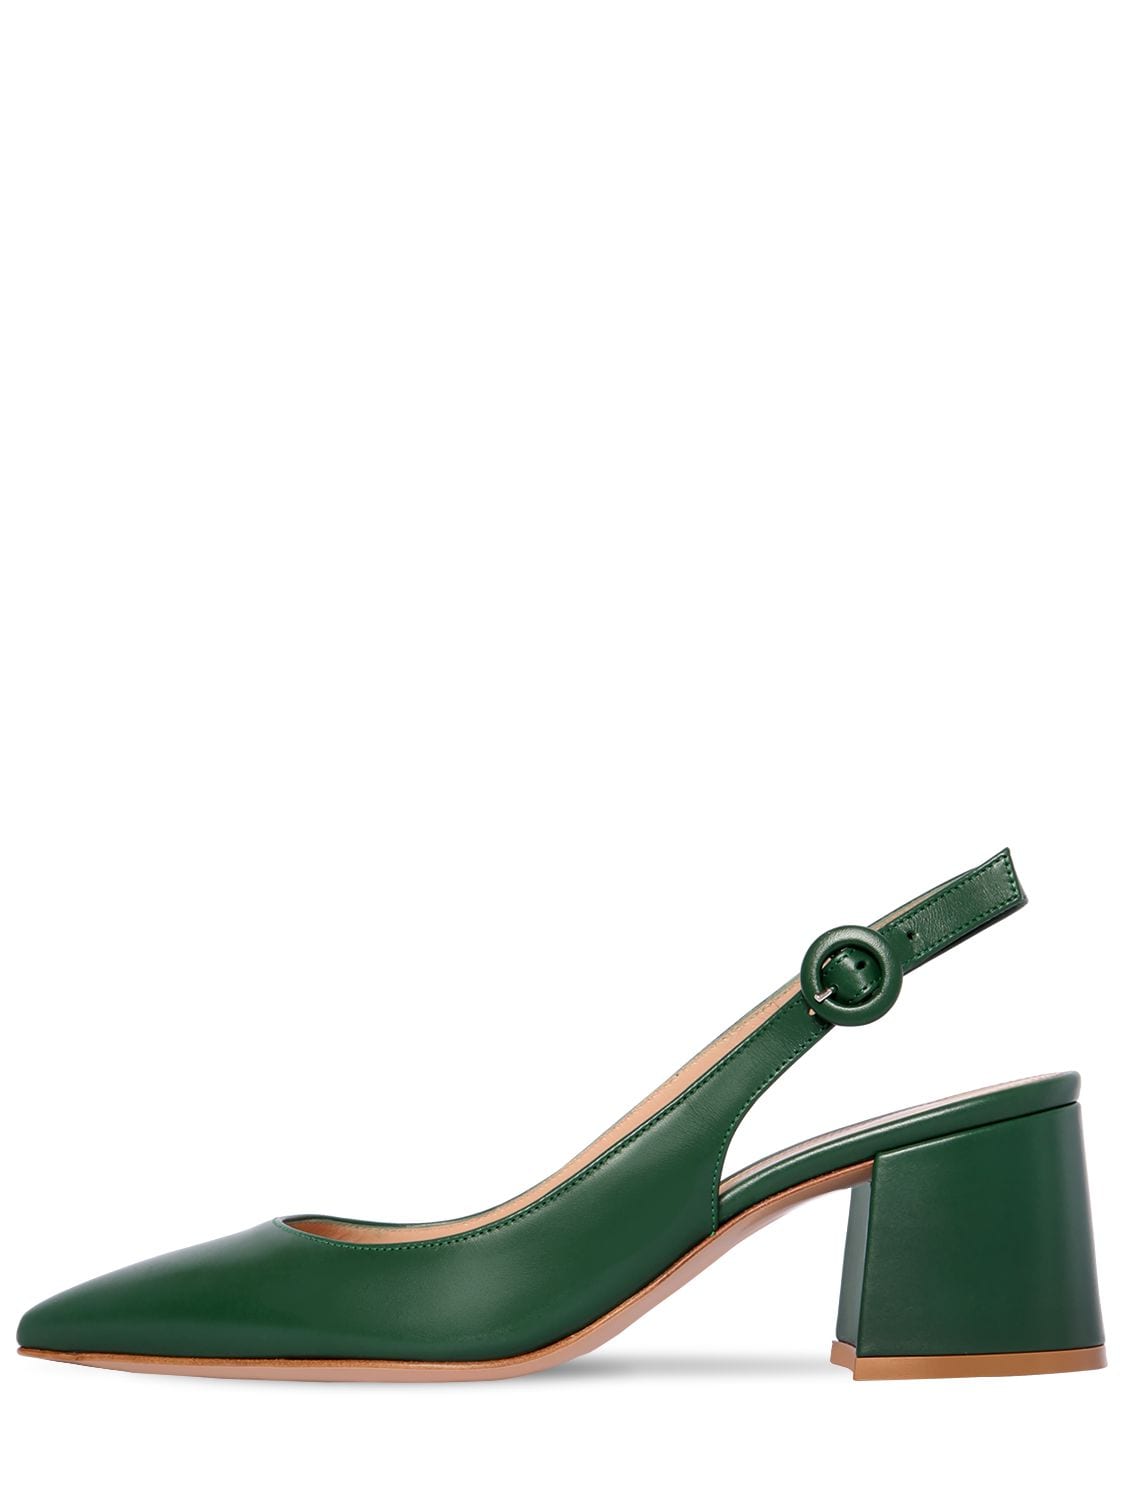 Gianvito Rossi 60mm Leather Sling Back Pumps In Green